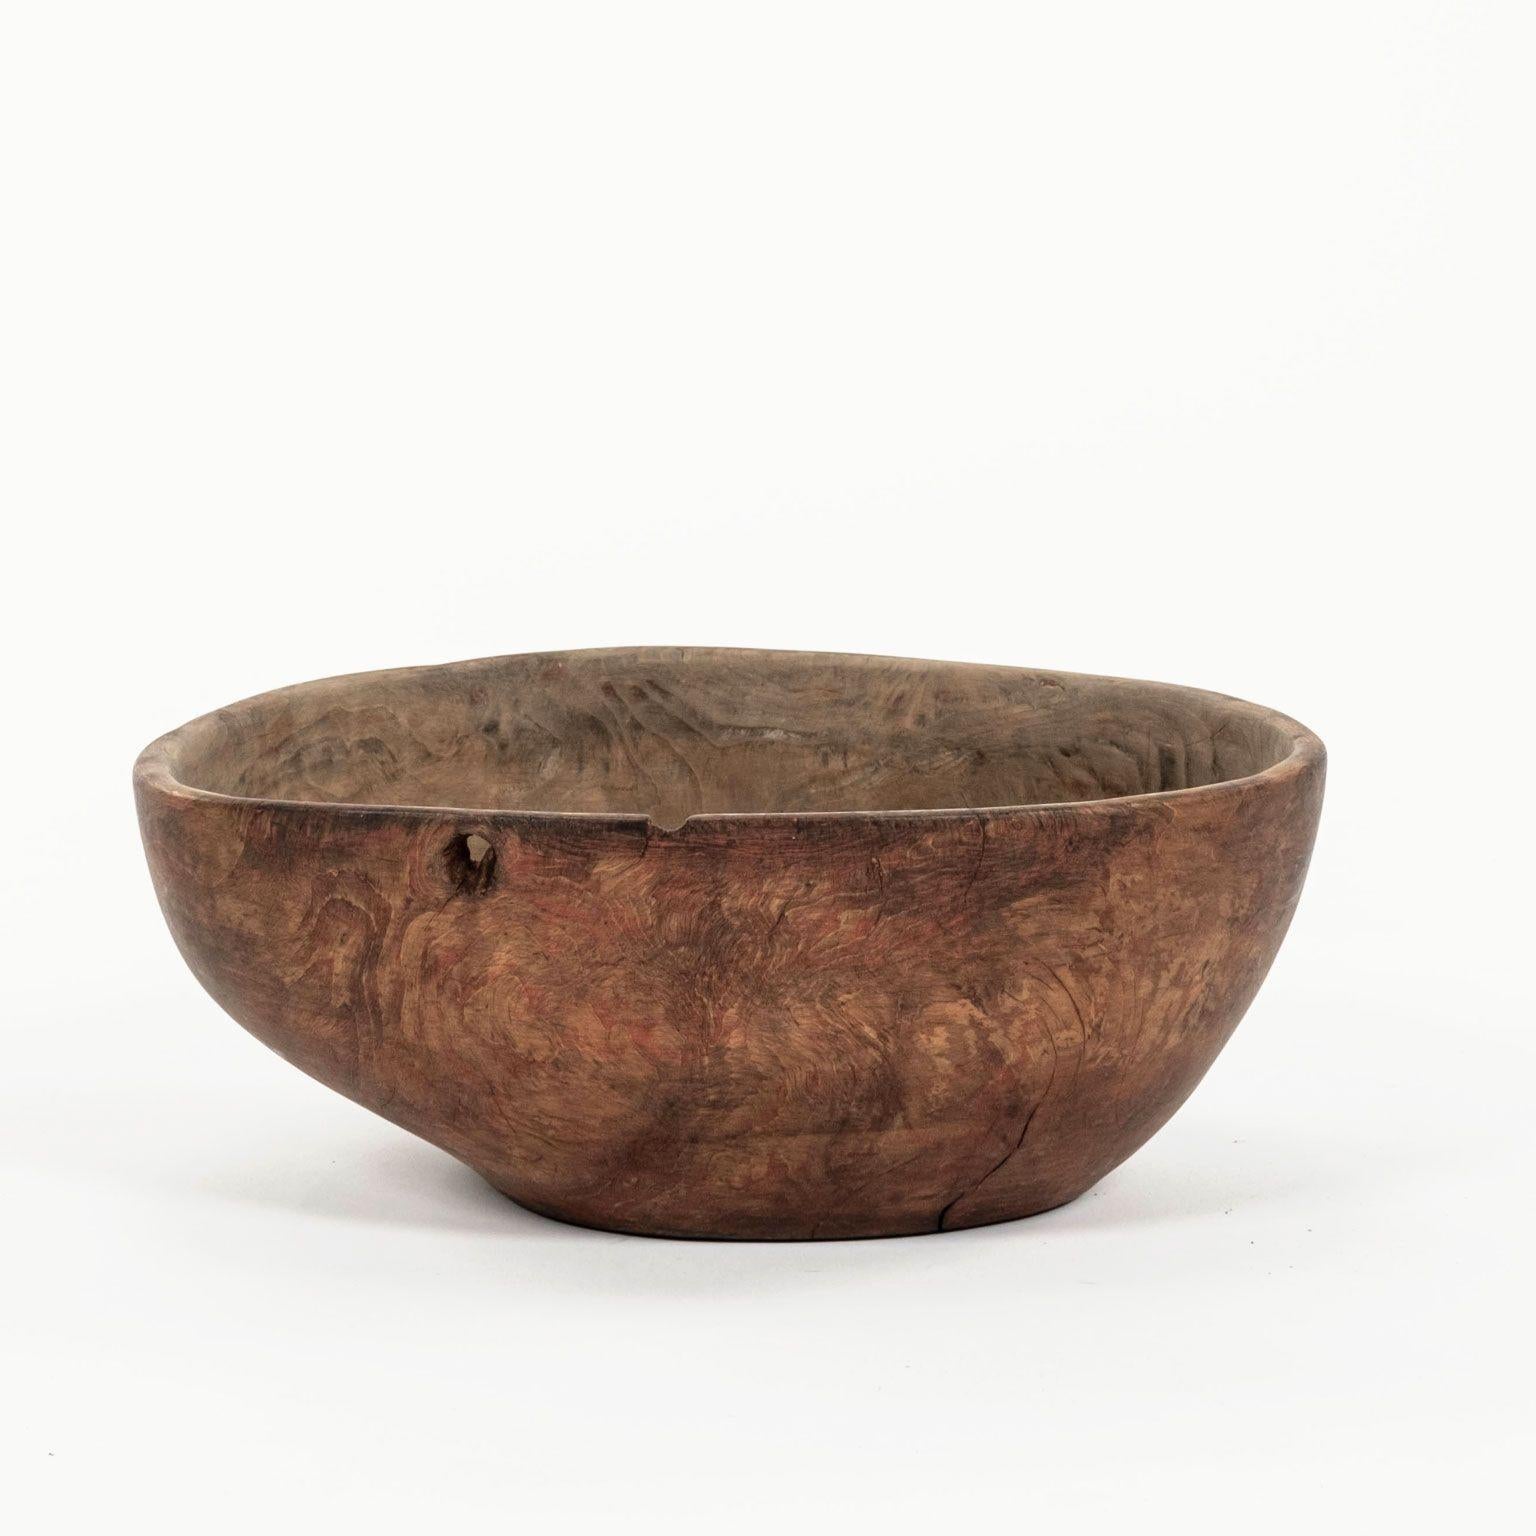 Primitive Swedish burl root wood dugout bowl with traces of exterior red paint dates to the late 19th century. Beautiful burl grain patterns. Inscribed and dated 